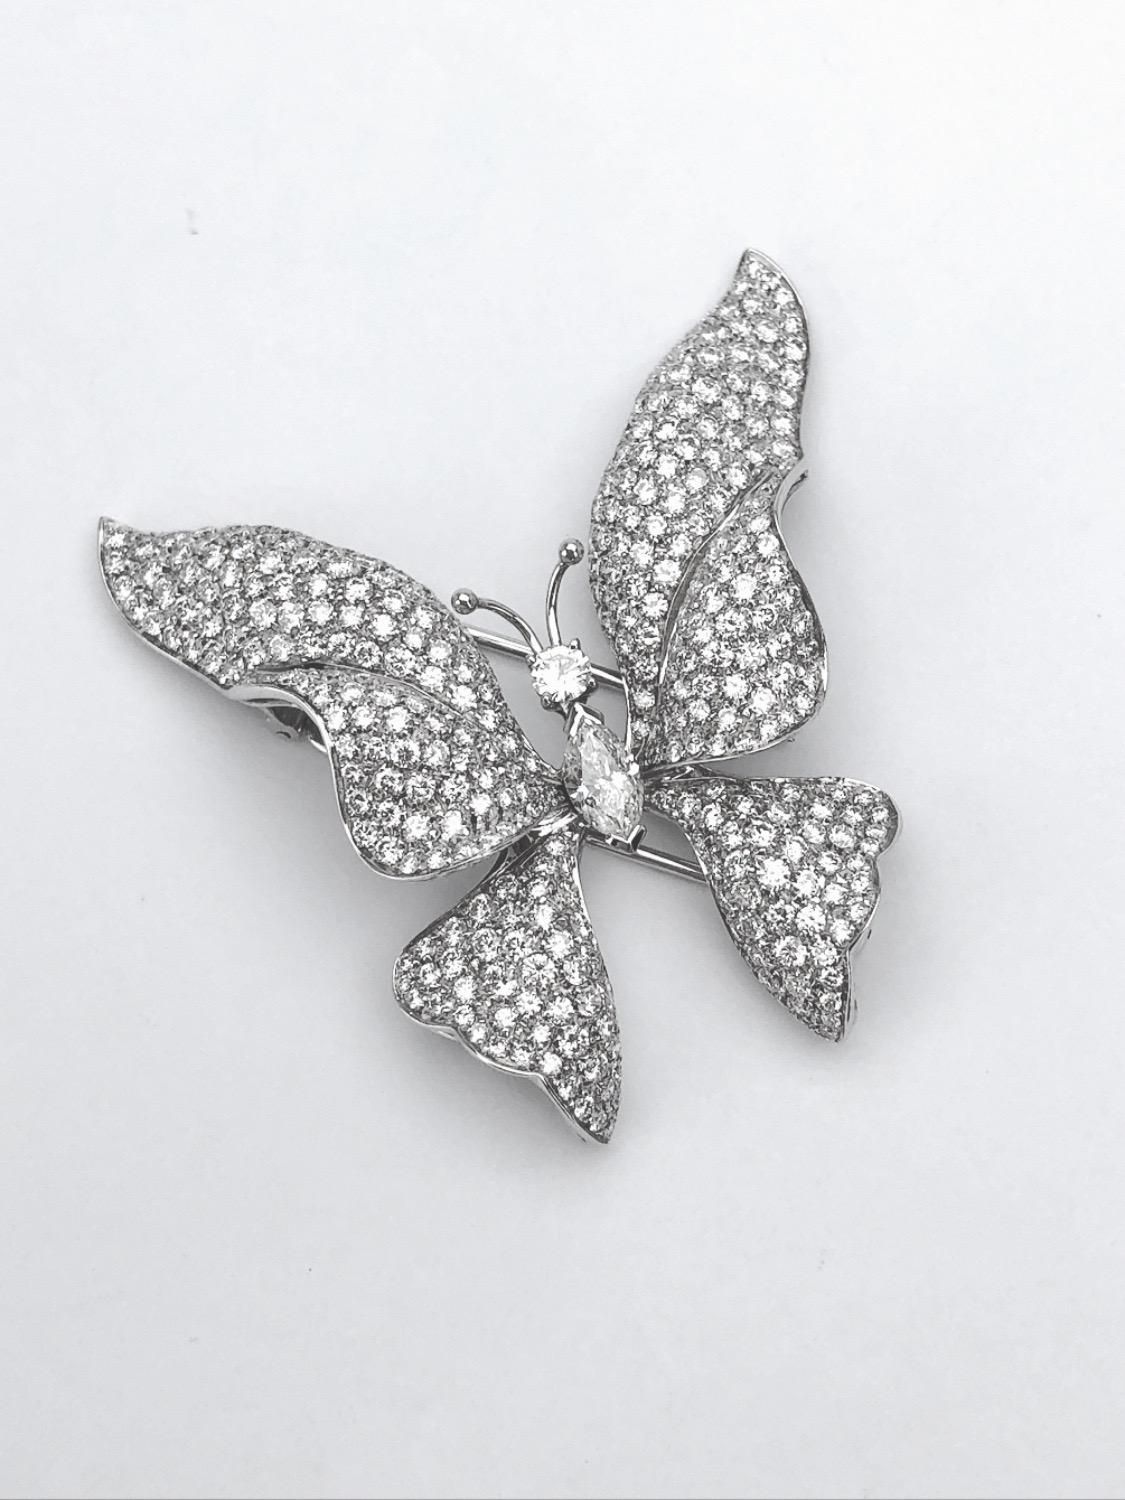 Contemporary Ambrosi 18 Karat White Gold, 7.38 Carat Diamond Butterfly Brooch For Sale